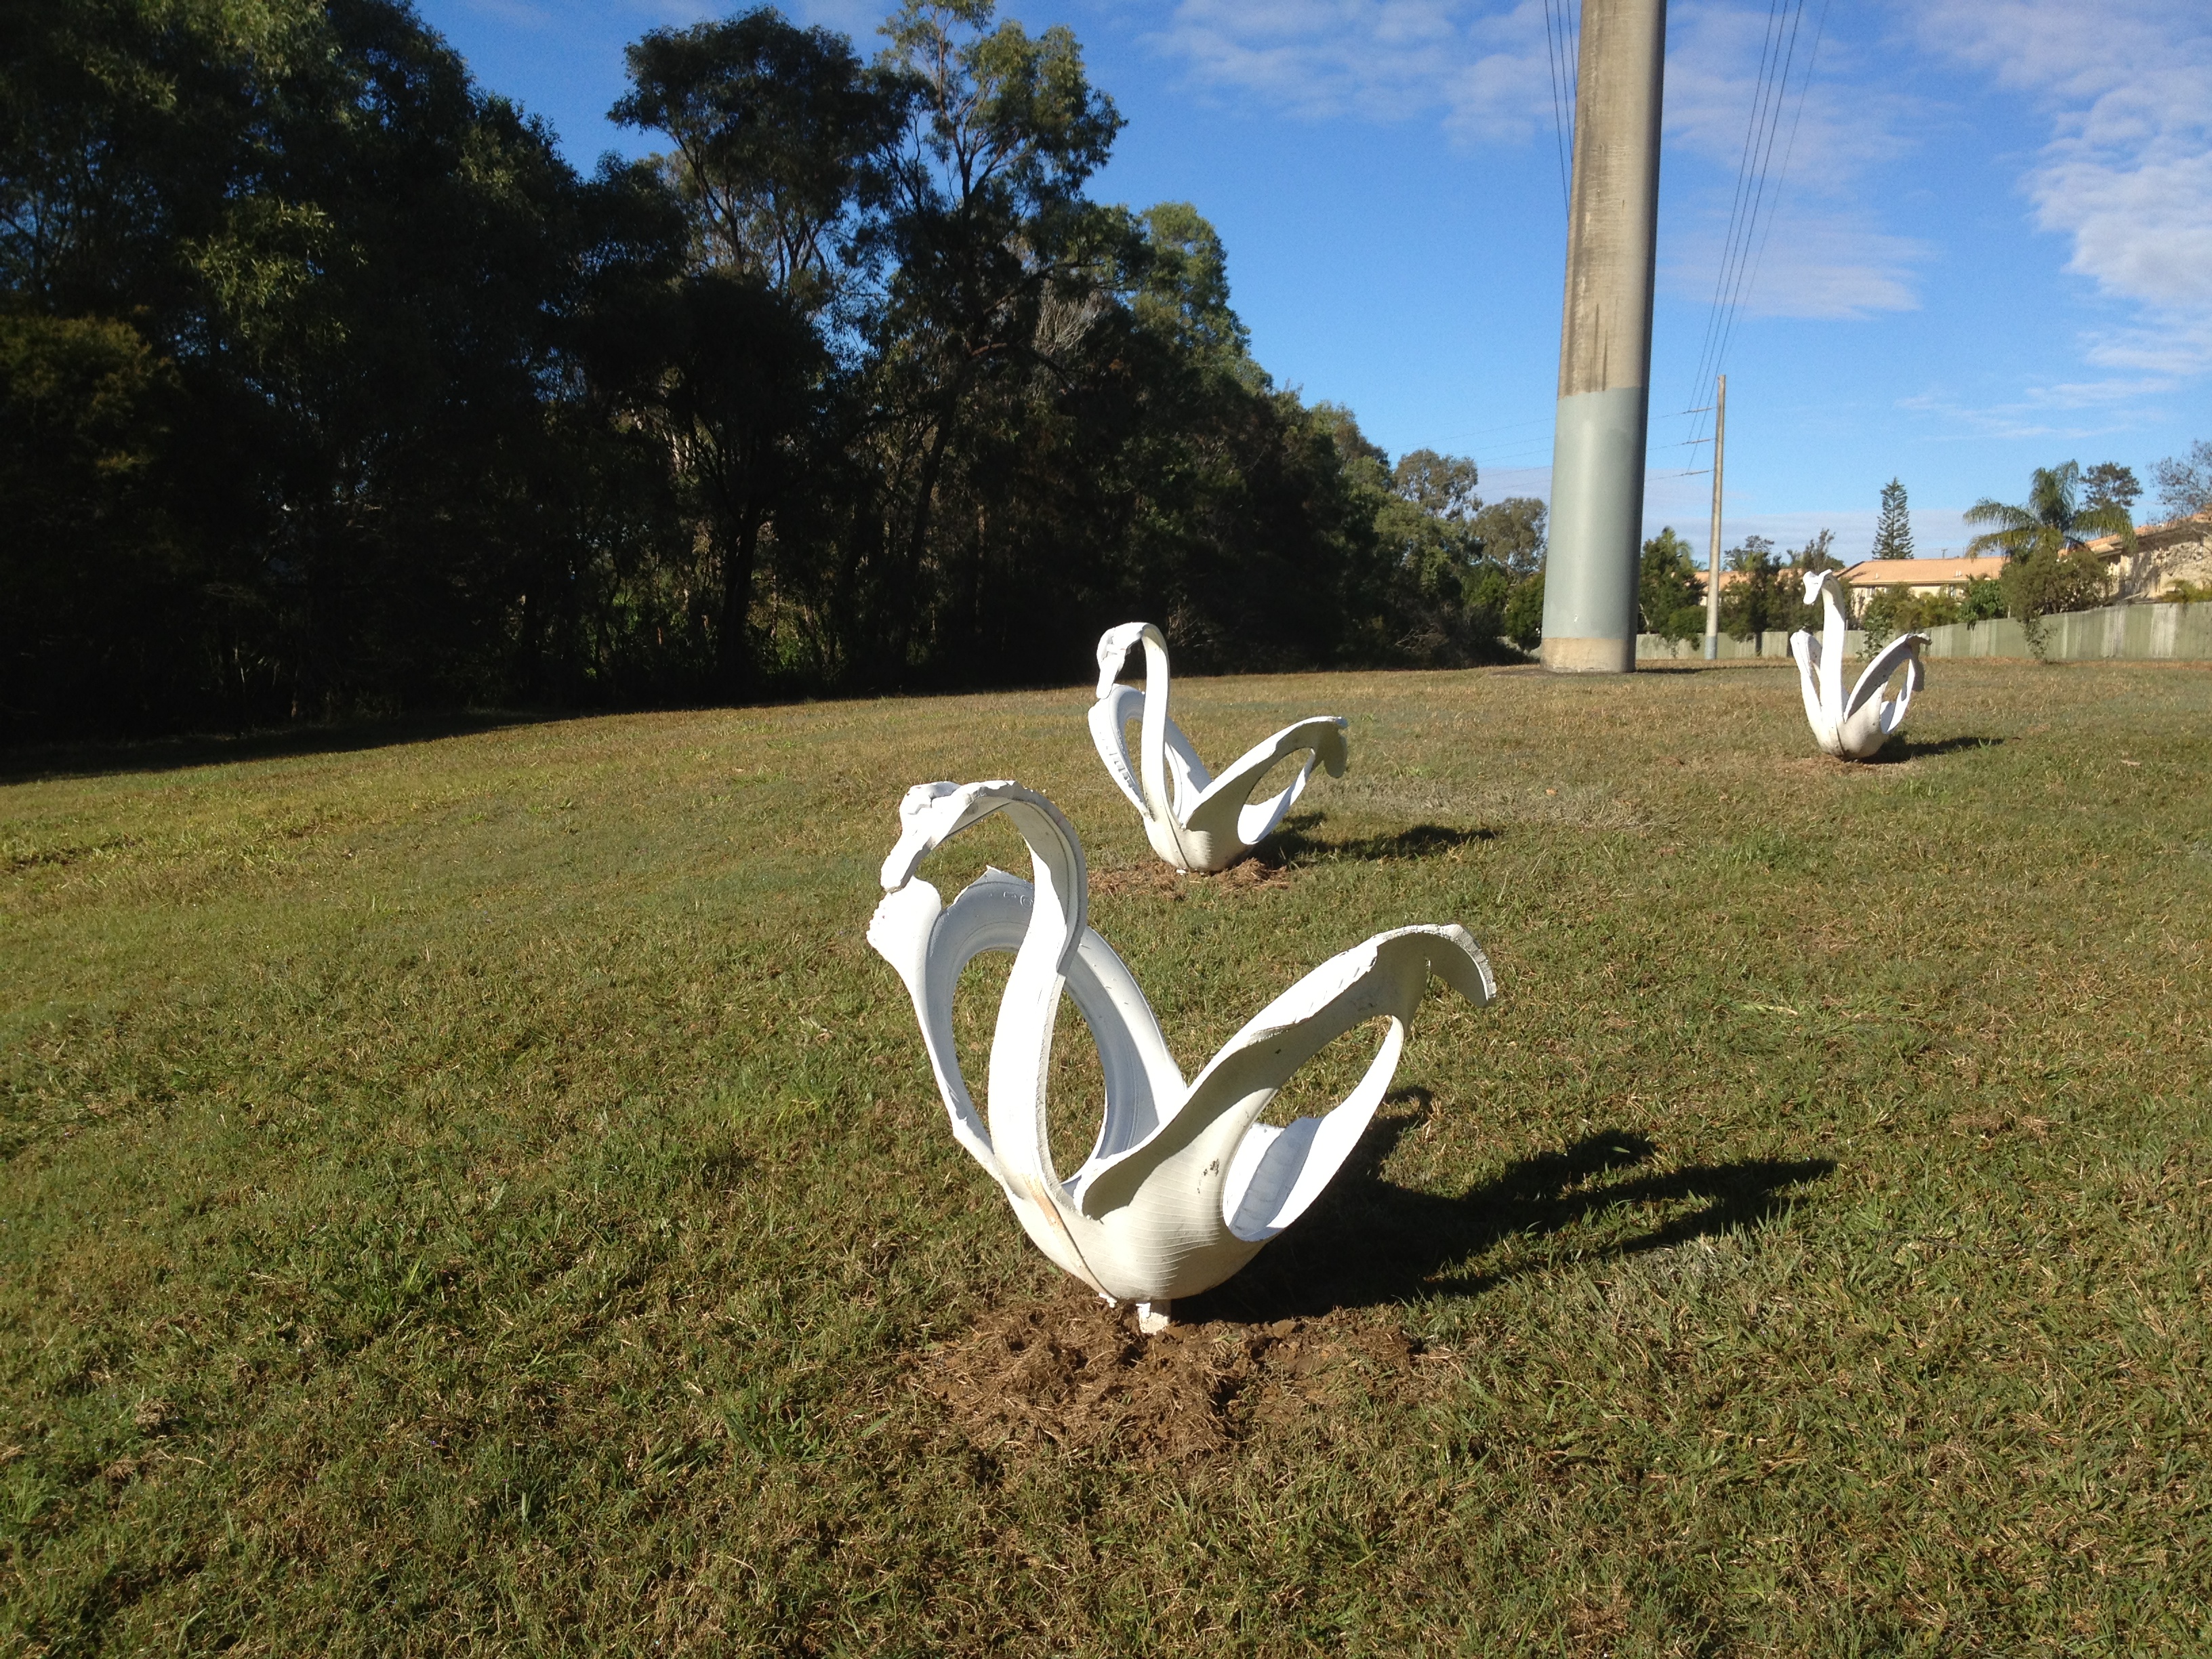 Slacks Creek tyre swan art installation, three swans created from old tyres found in the creek